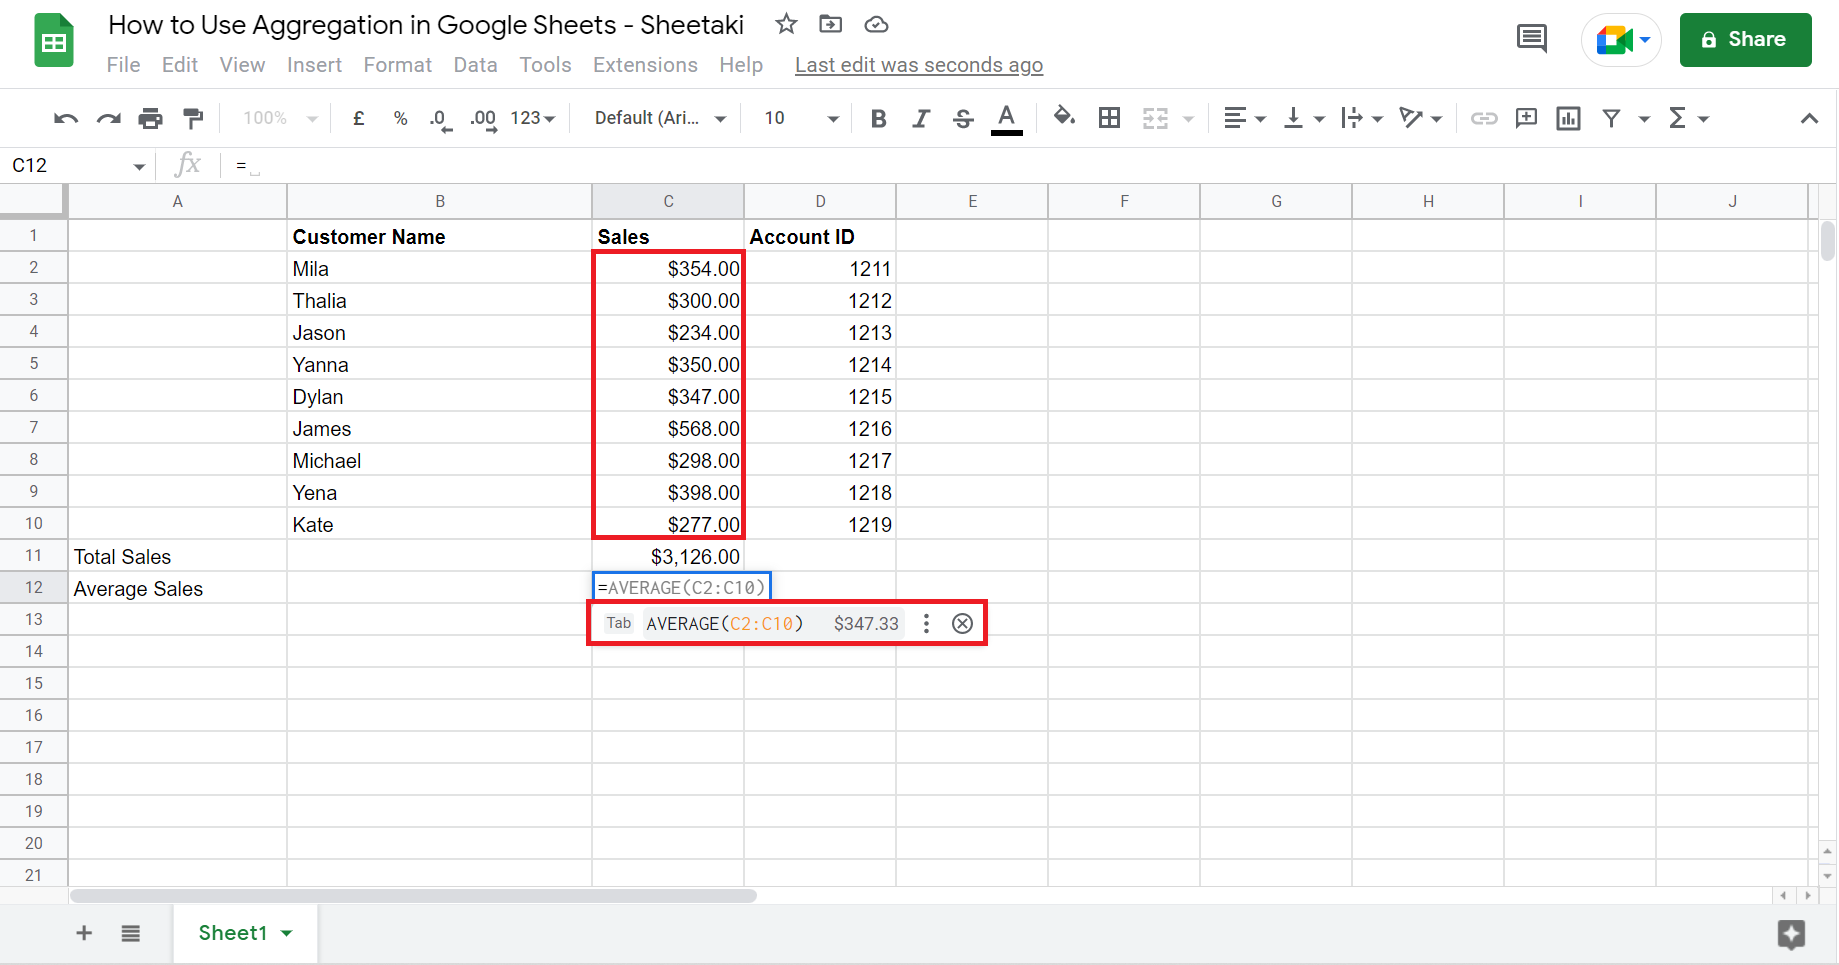 Aggregation in Google Sheets